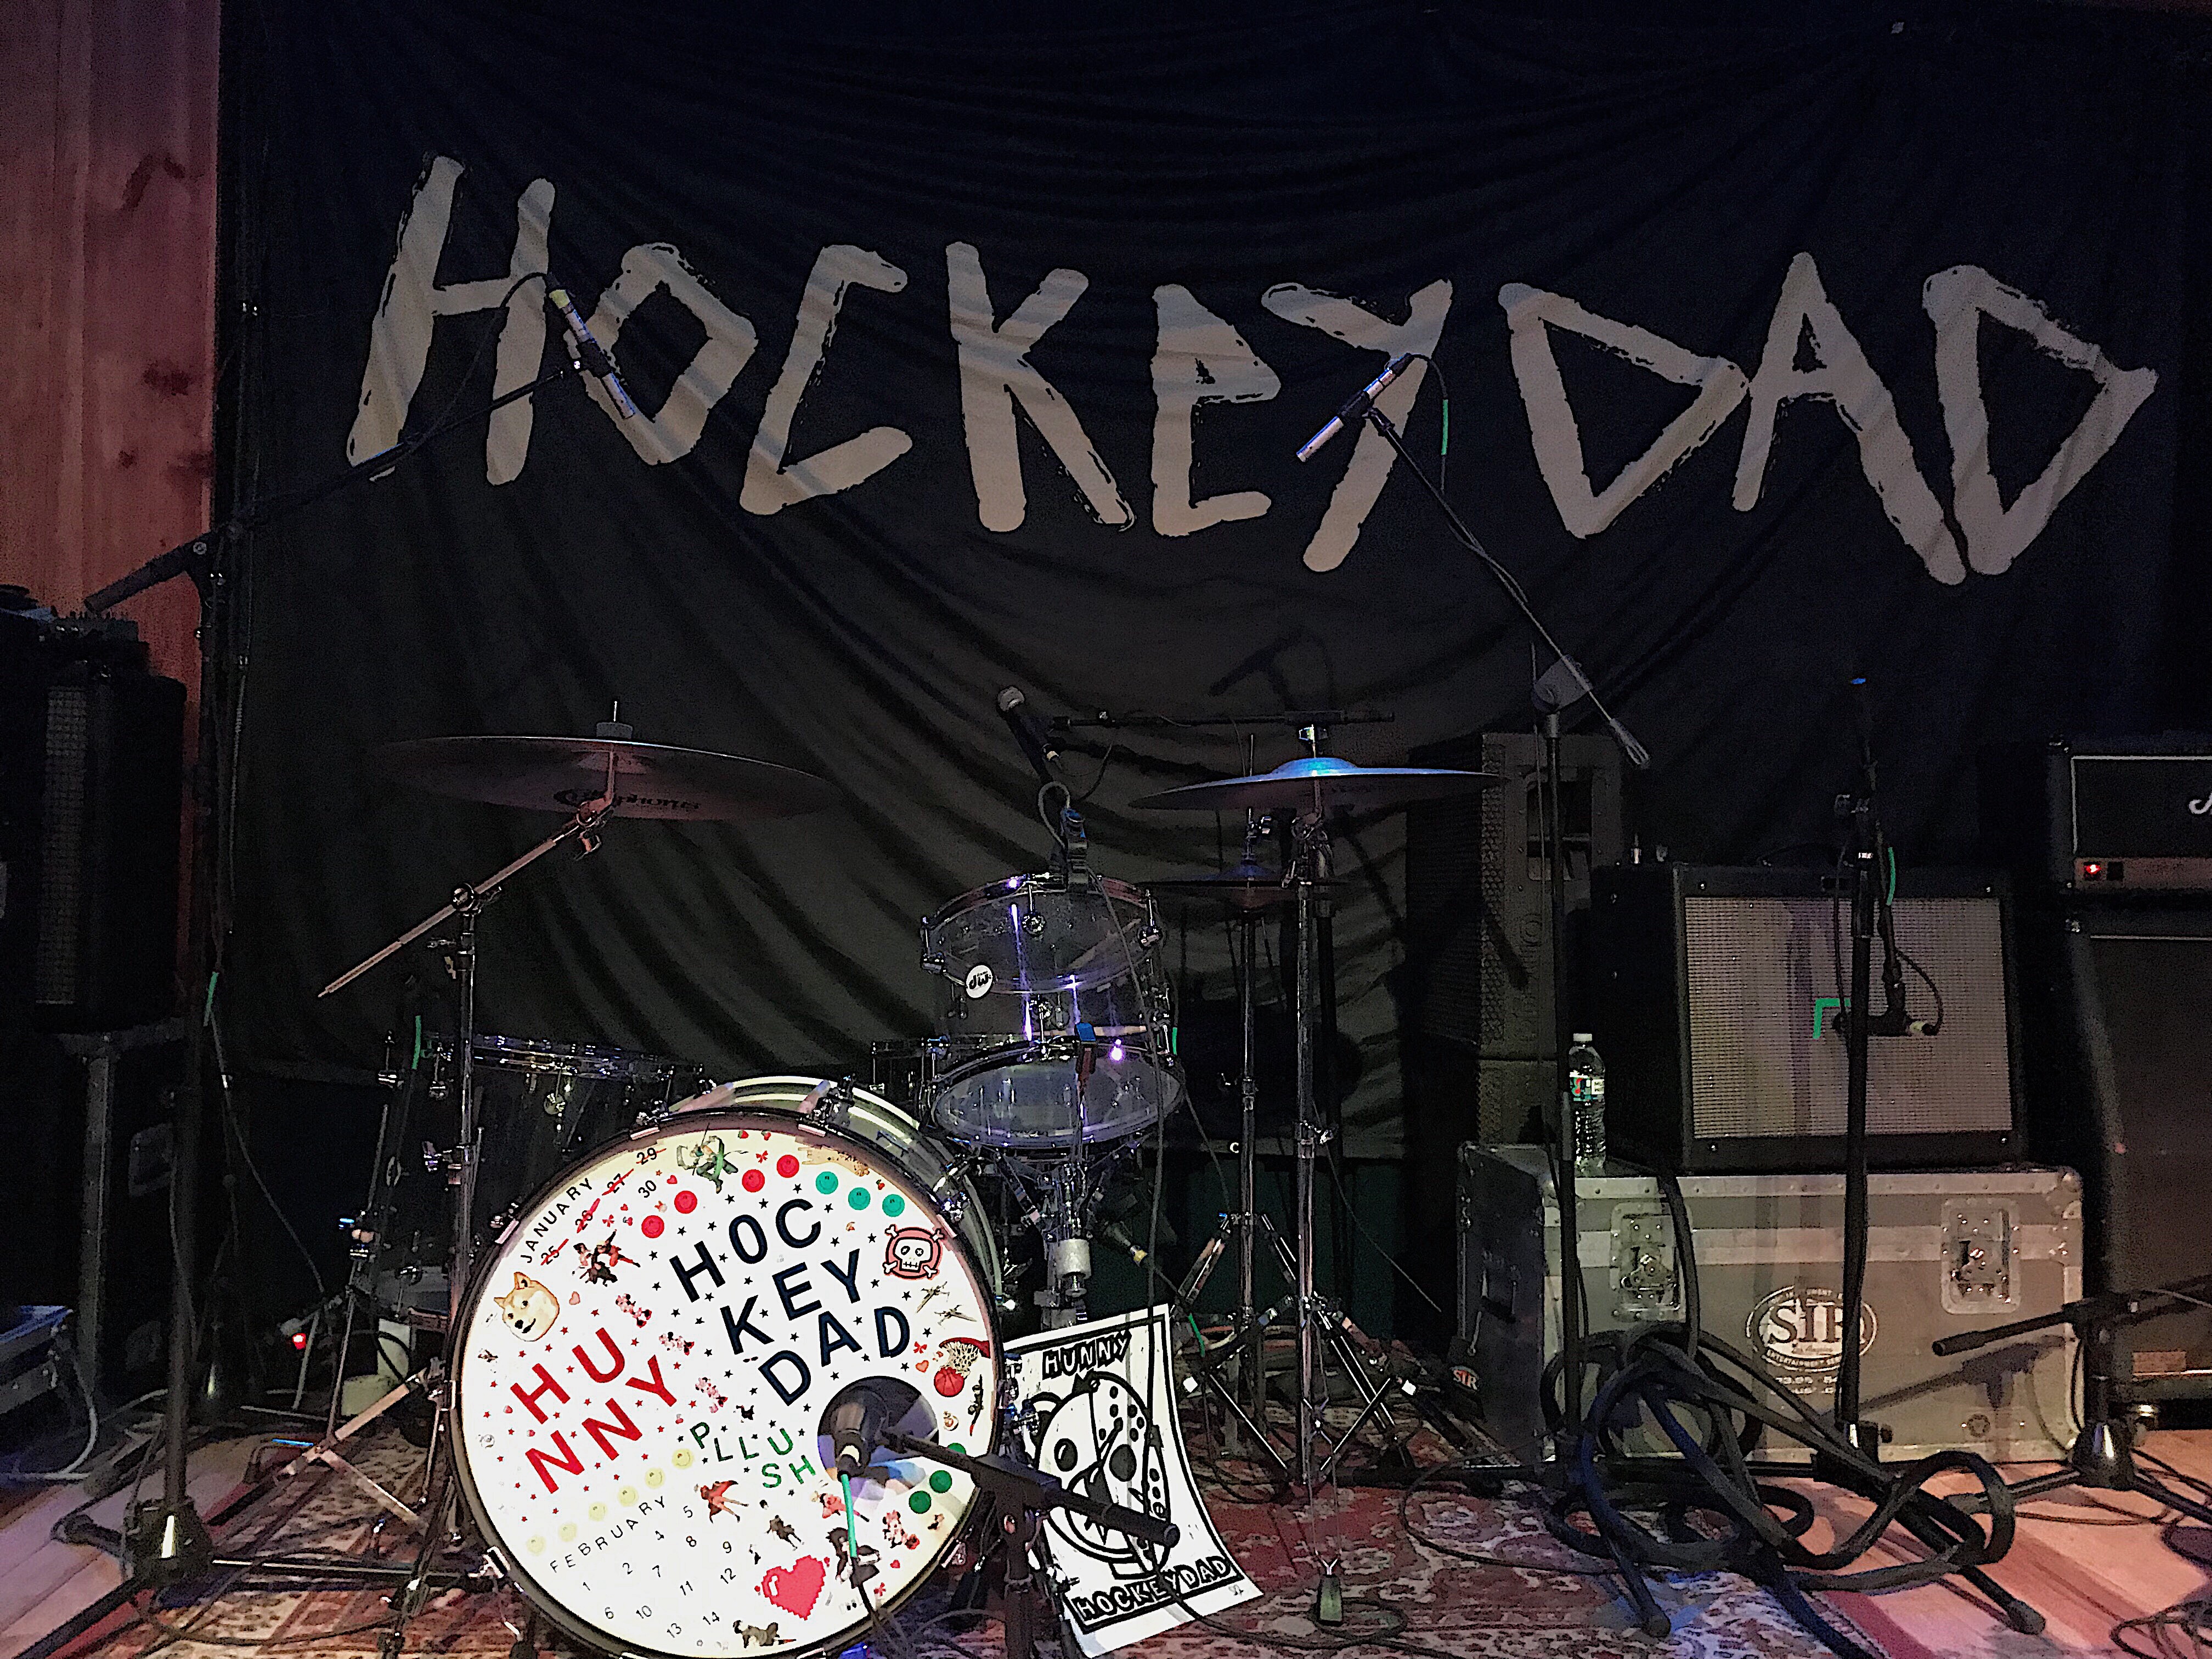 A banner with "Hockey Dad" on it and a drum kit decorated with stickers spelling the band names.